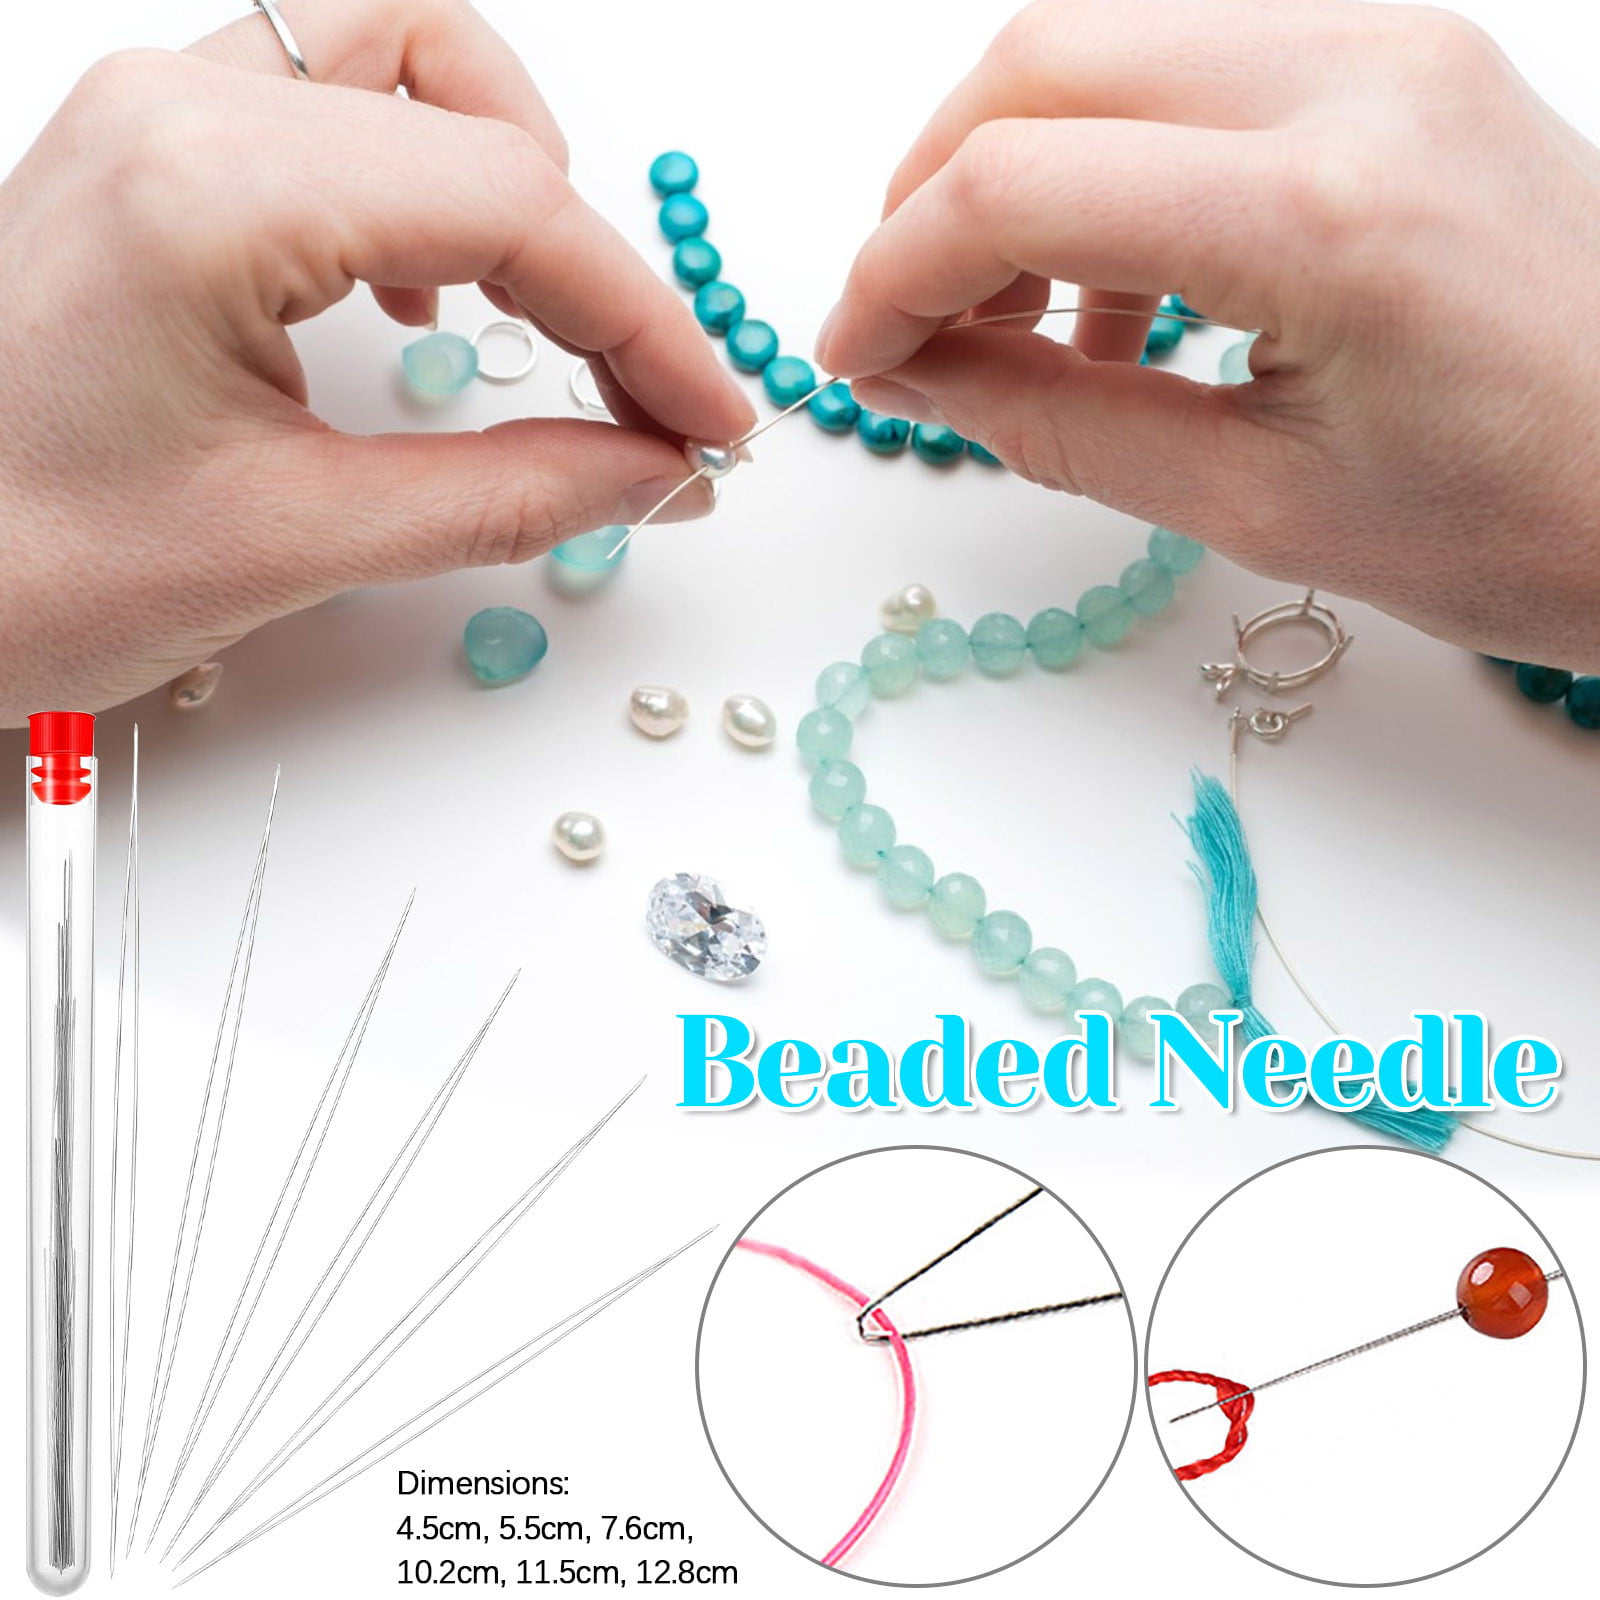 EXCEART 6pcs Embroidery Needles Metal Beading Tool DIY Beads Chain Tool  Beading Needles Bead Tool Bead Threading Tool Bead Threader Bead Stringing